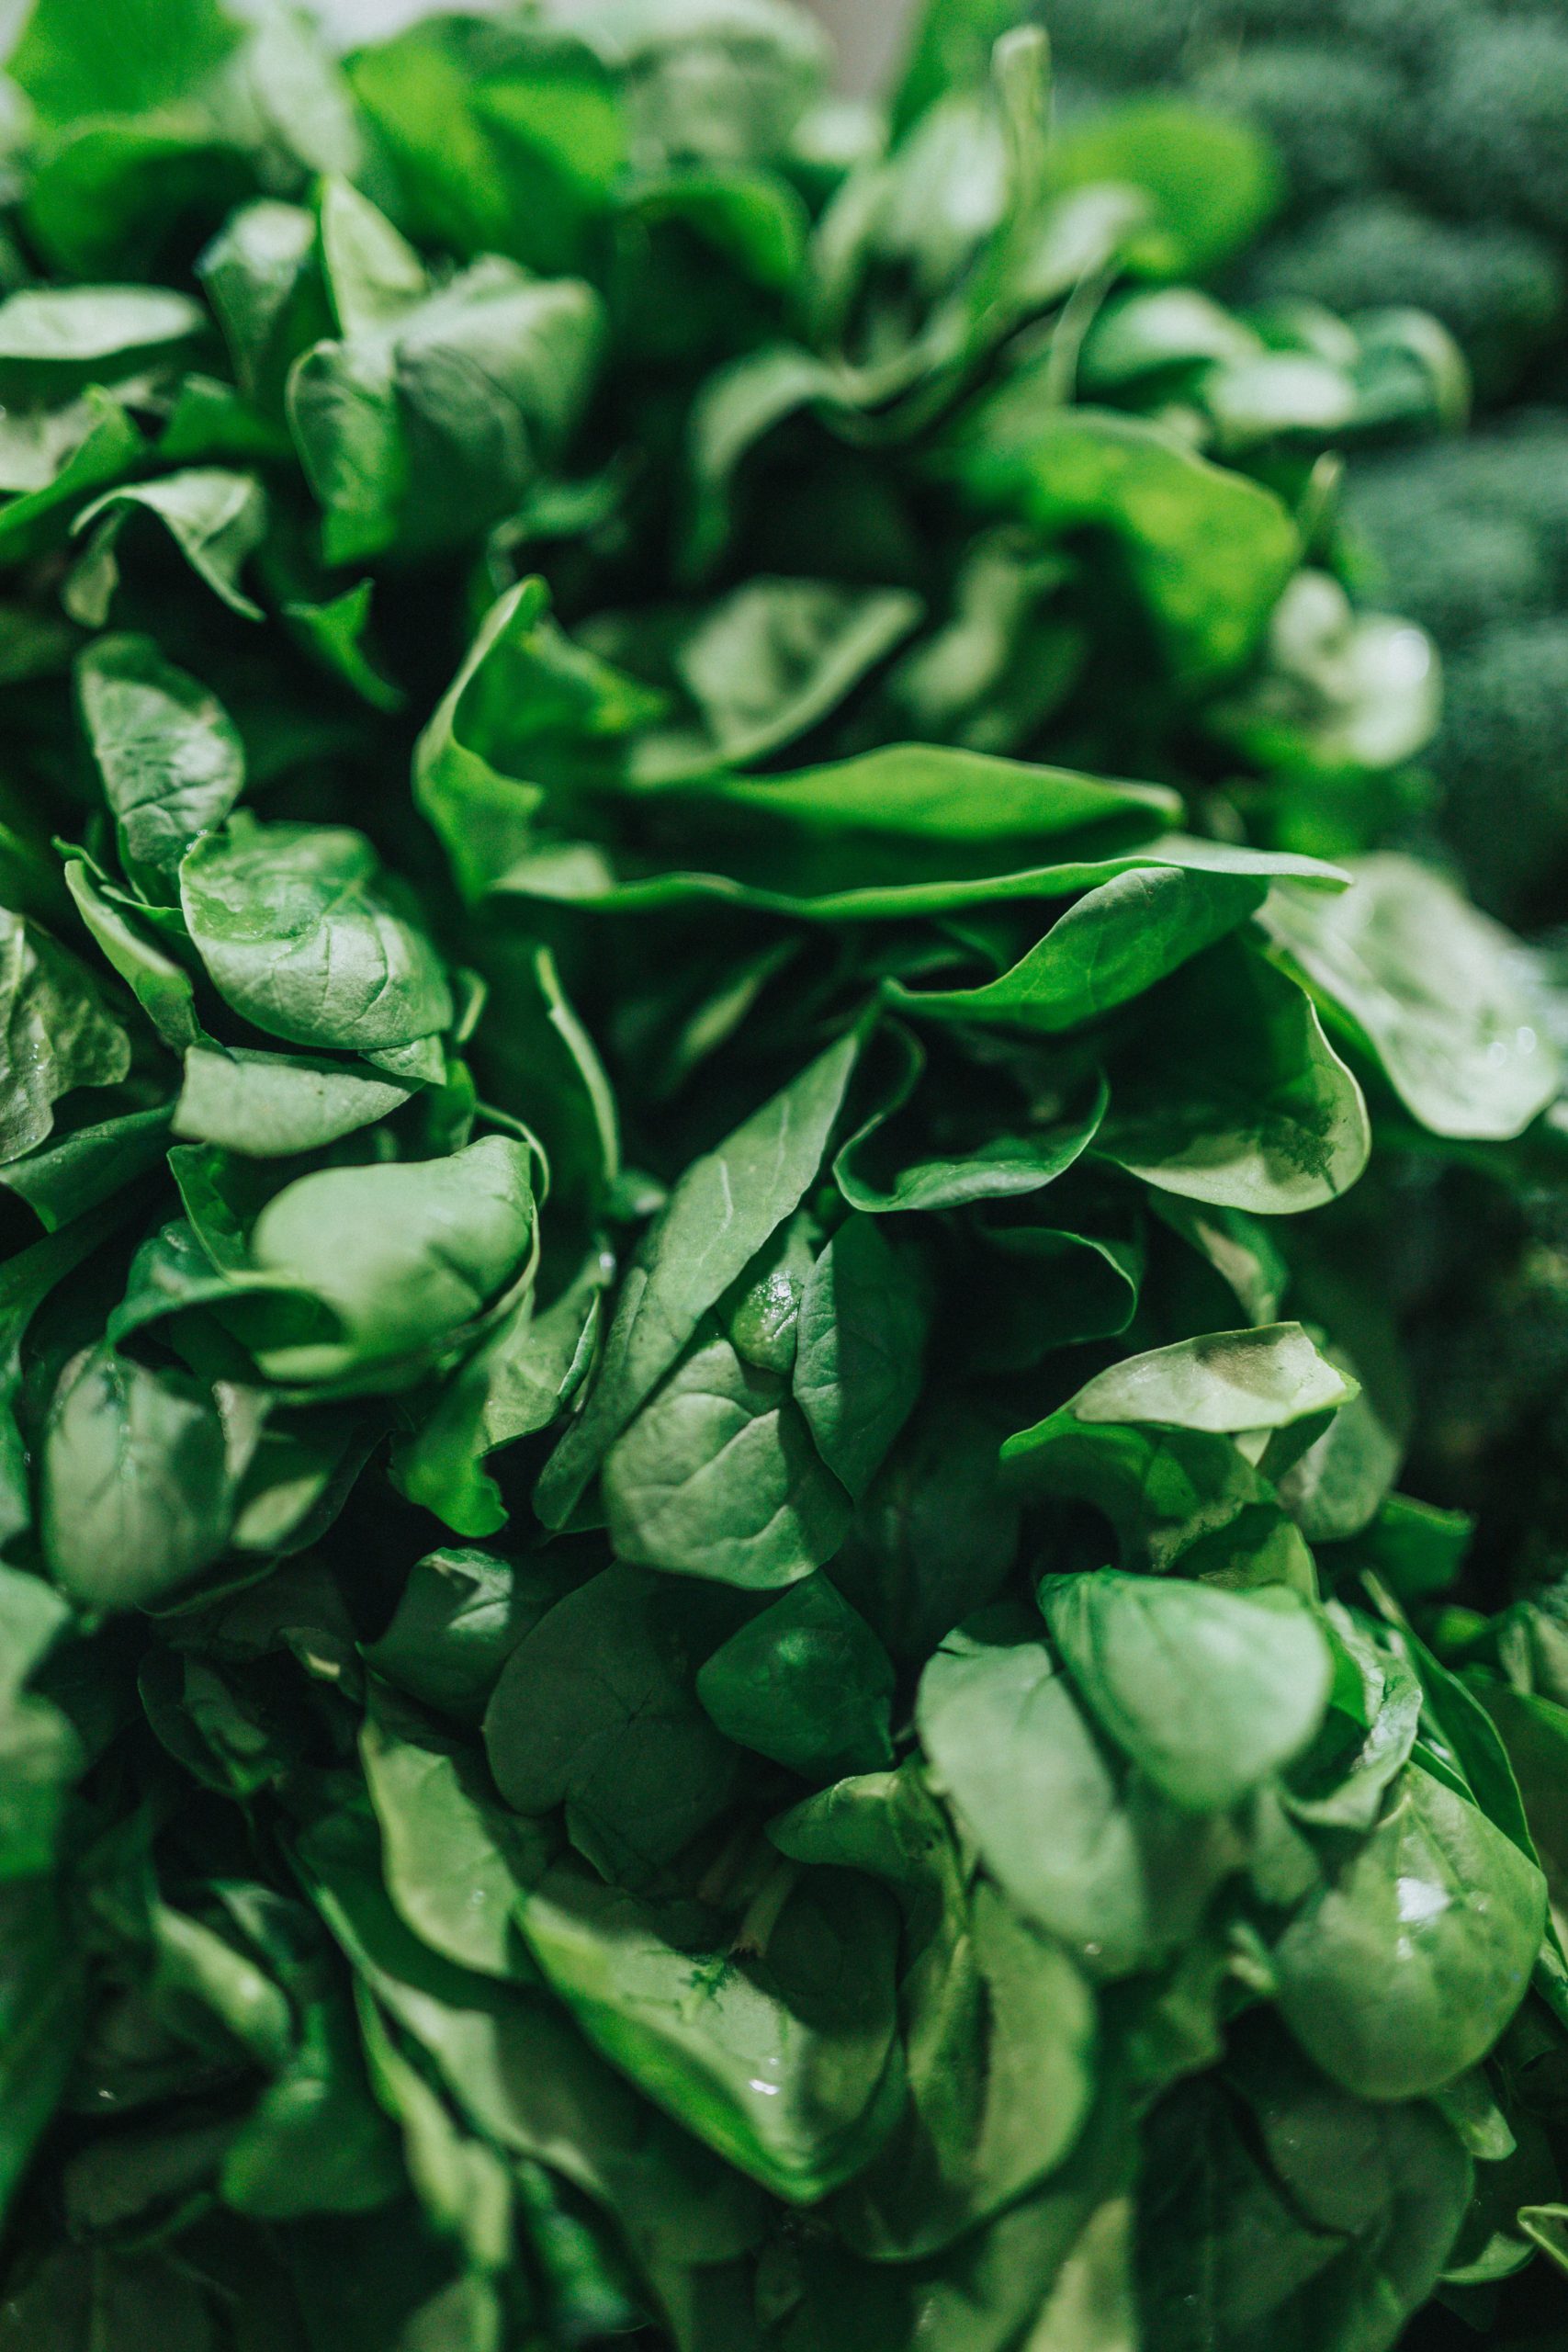 Are Arugula And Spinach The Same Thing? What Is The Difference?